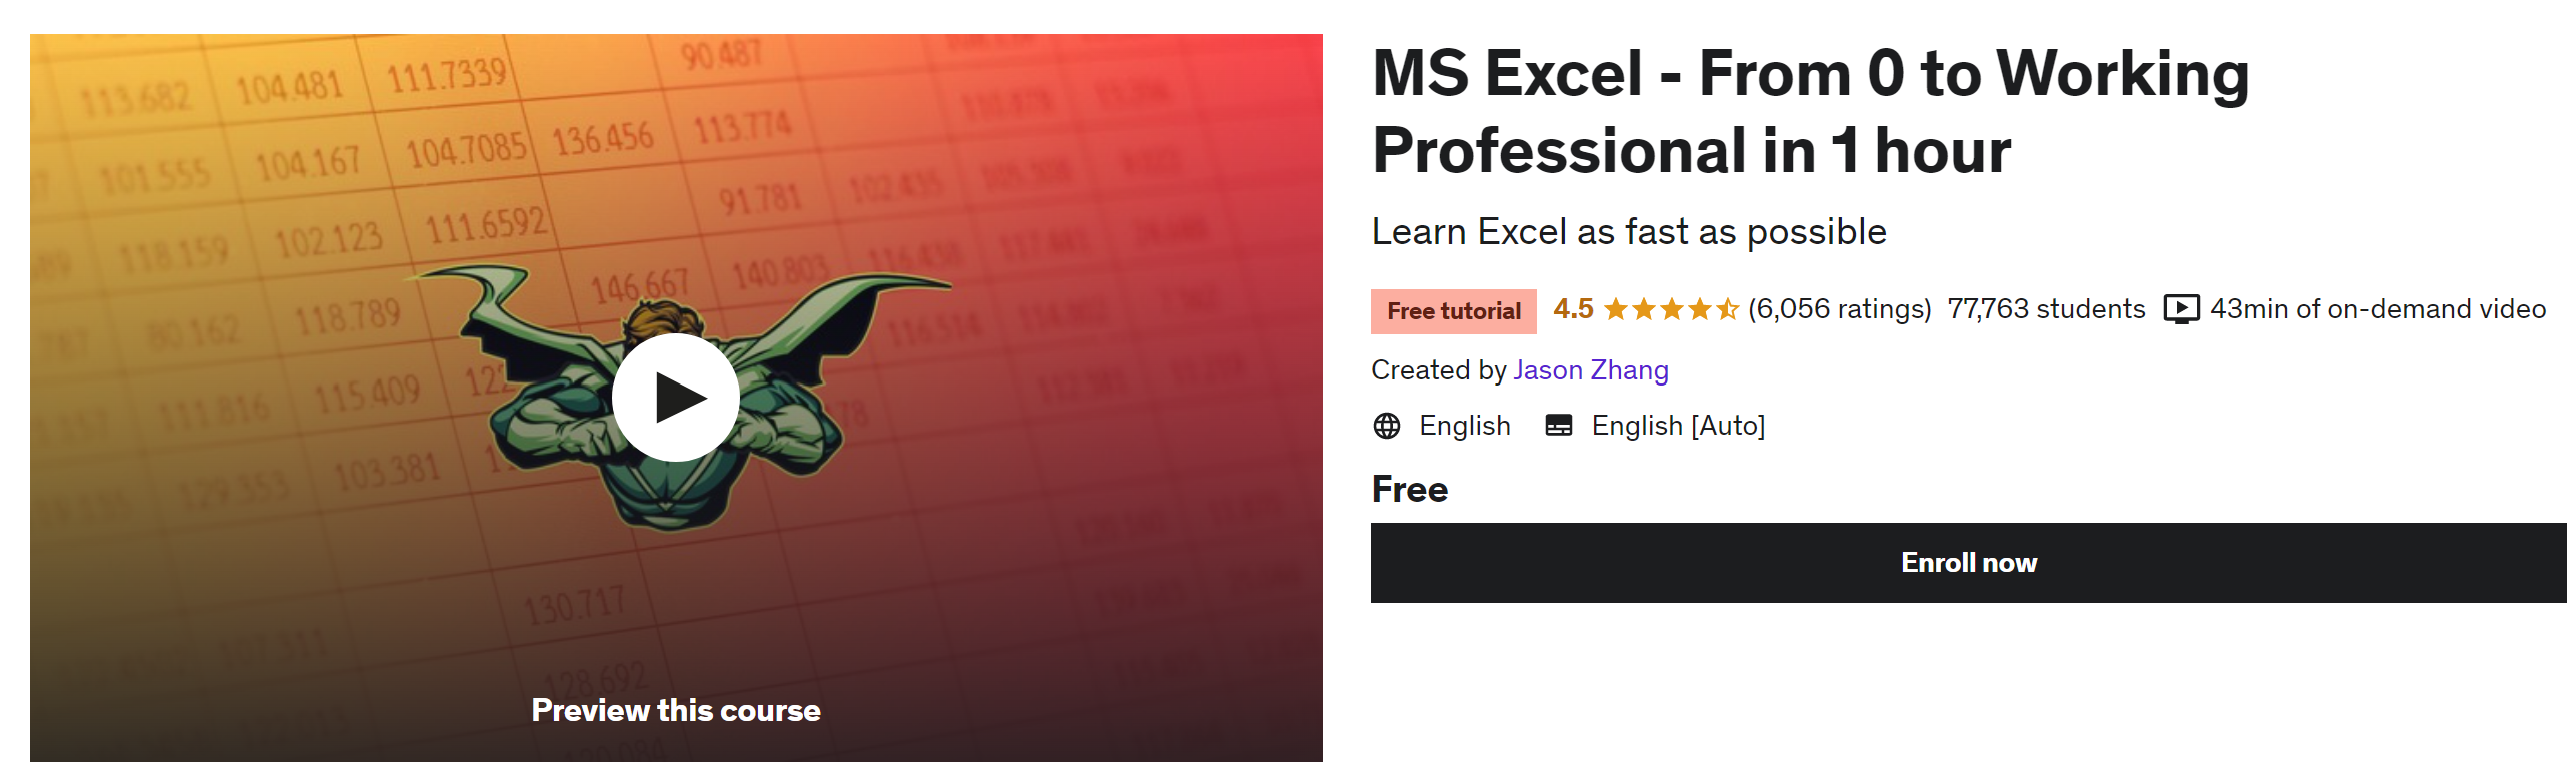 MS Excel - From 0 to Working Professional in 1 hour